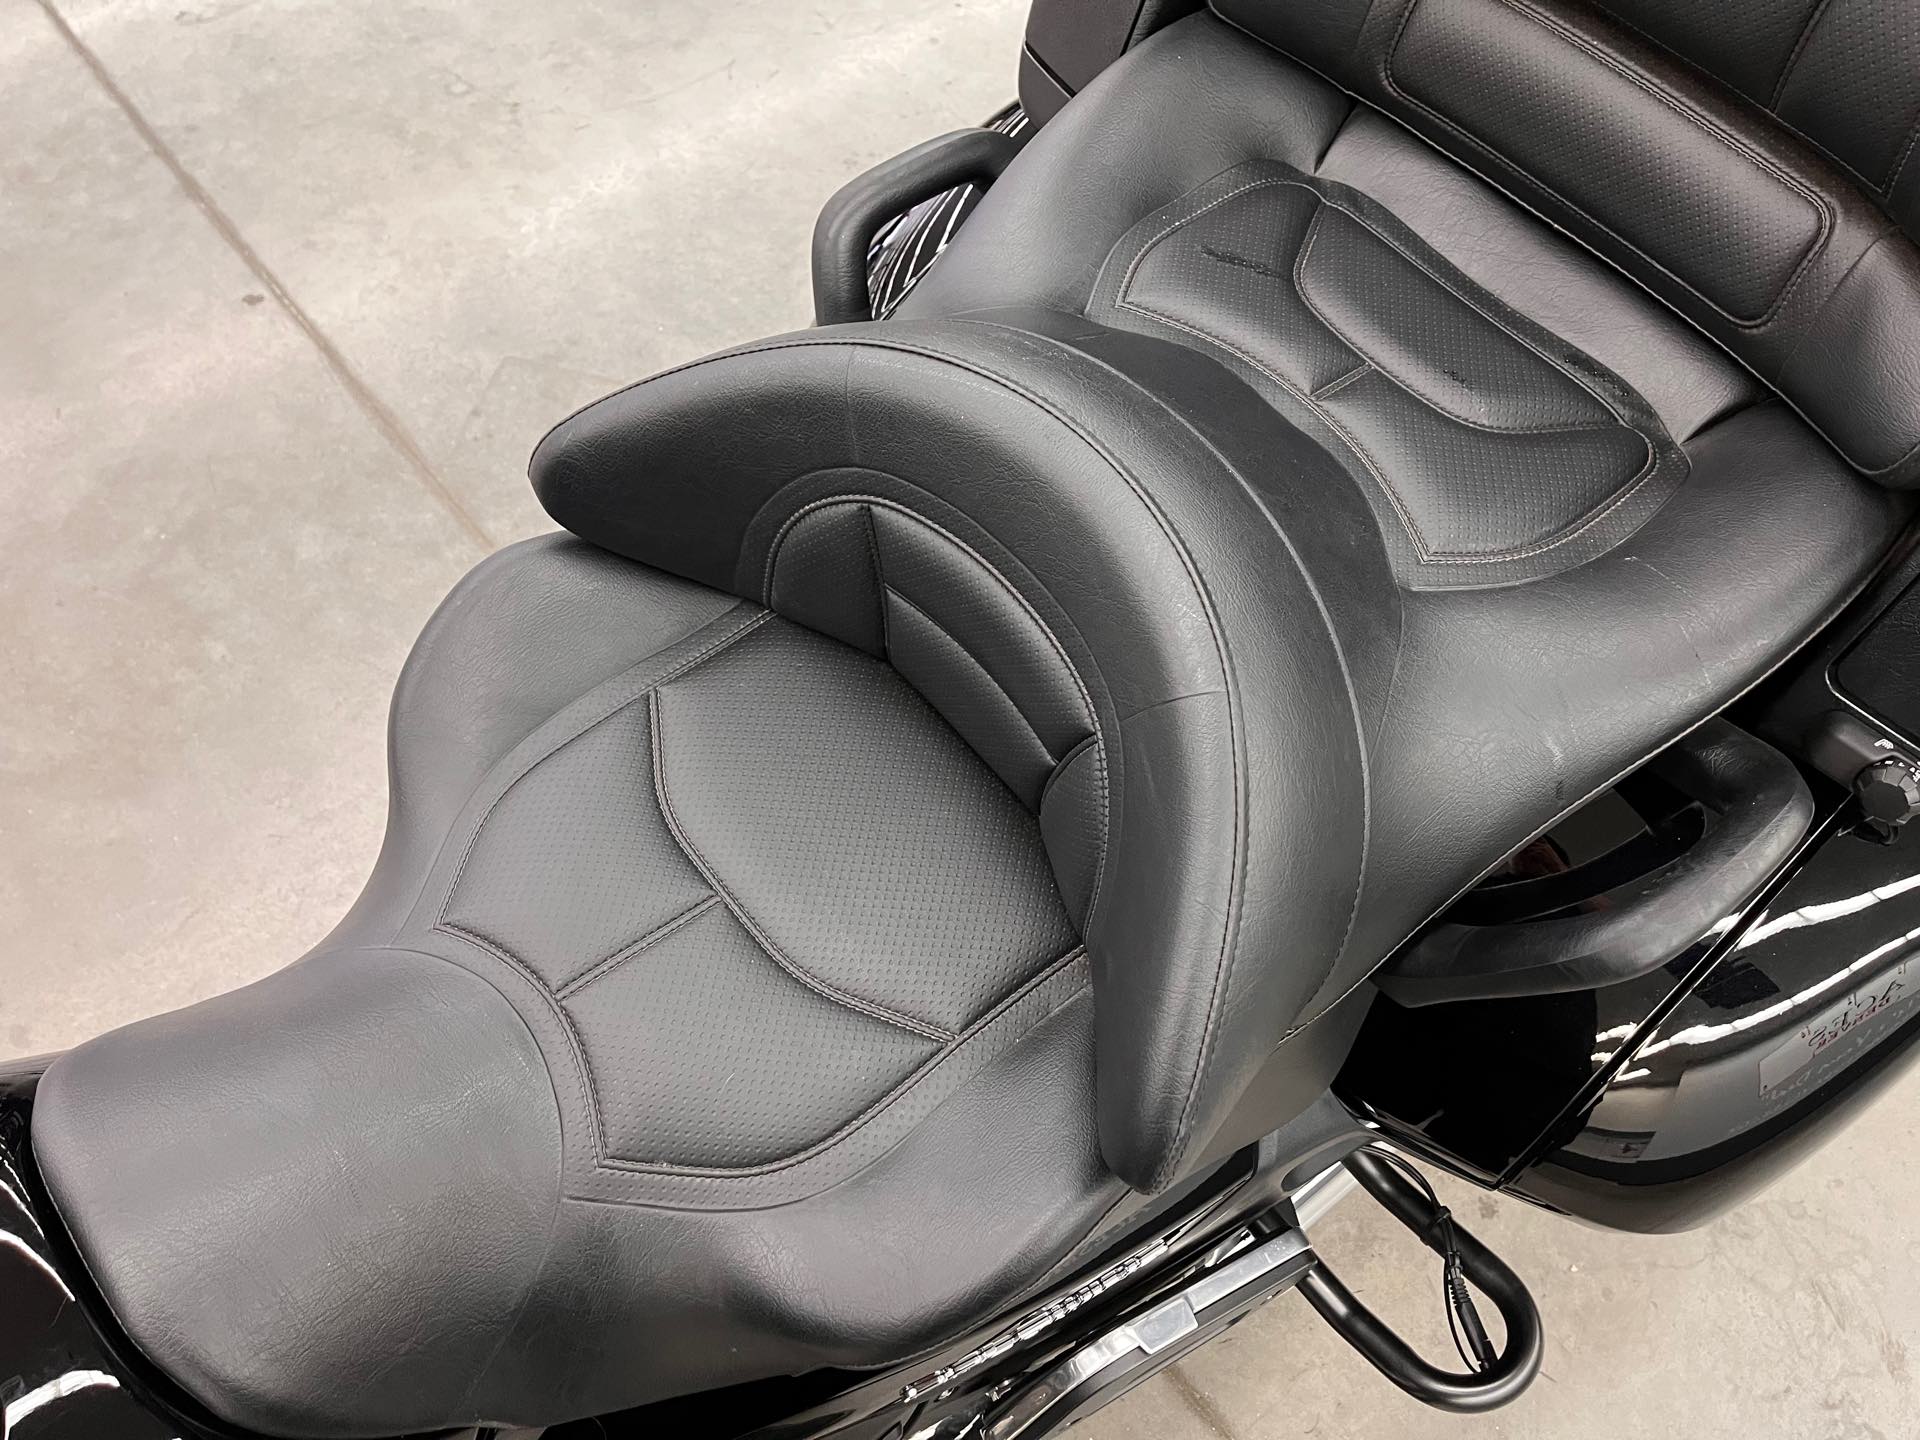 2014 Honda Gold Wing Audio Comfort at Aces Motorcycles - Denver